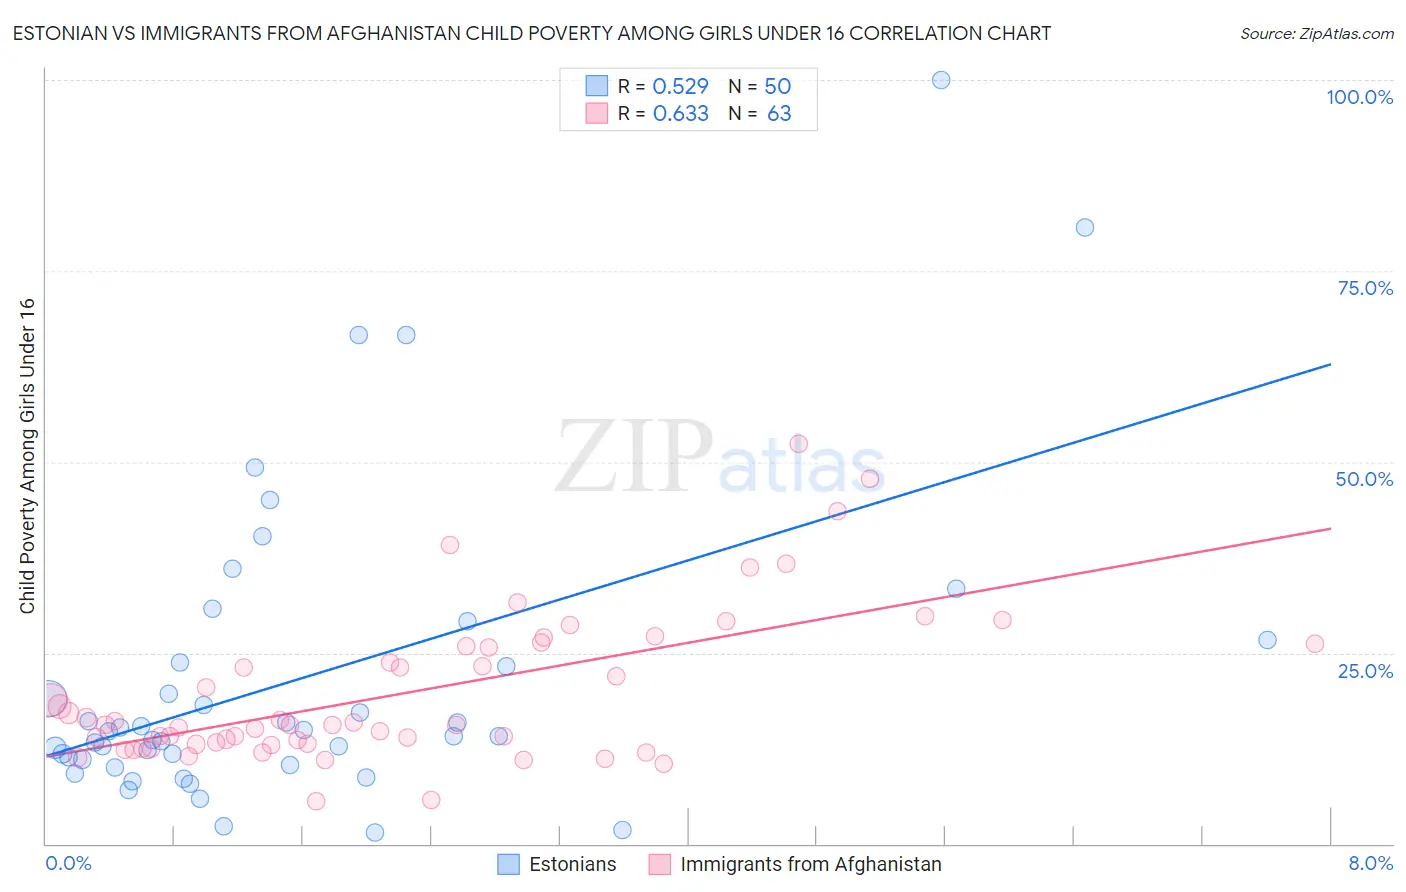 Estonian vs Immigrants from Afghanistan Child Poverty Among Girls Under 16